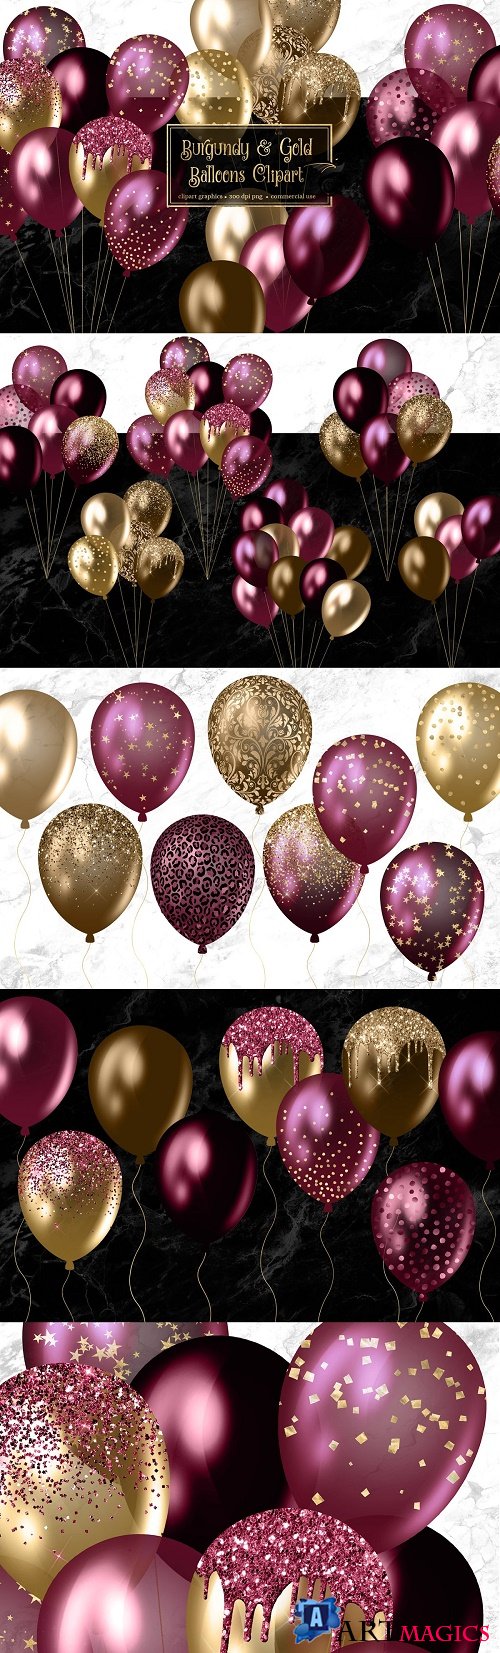 Burgundy and Gold Balloons Clipart - 4465656